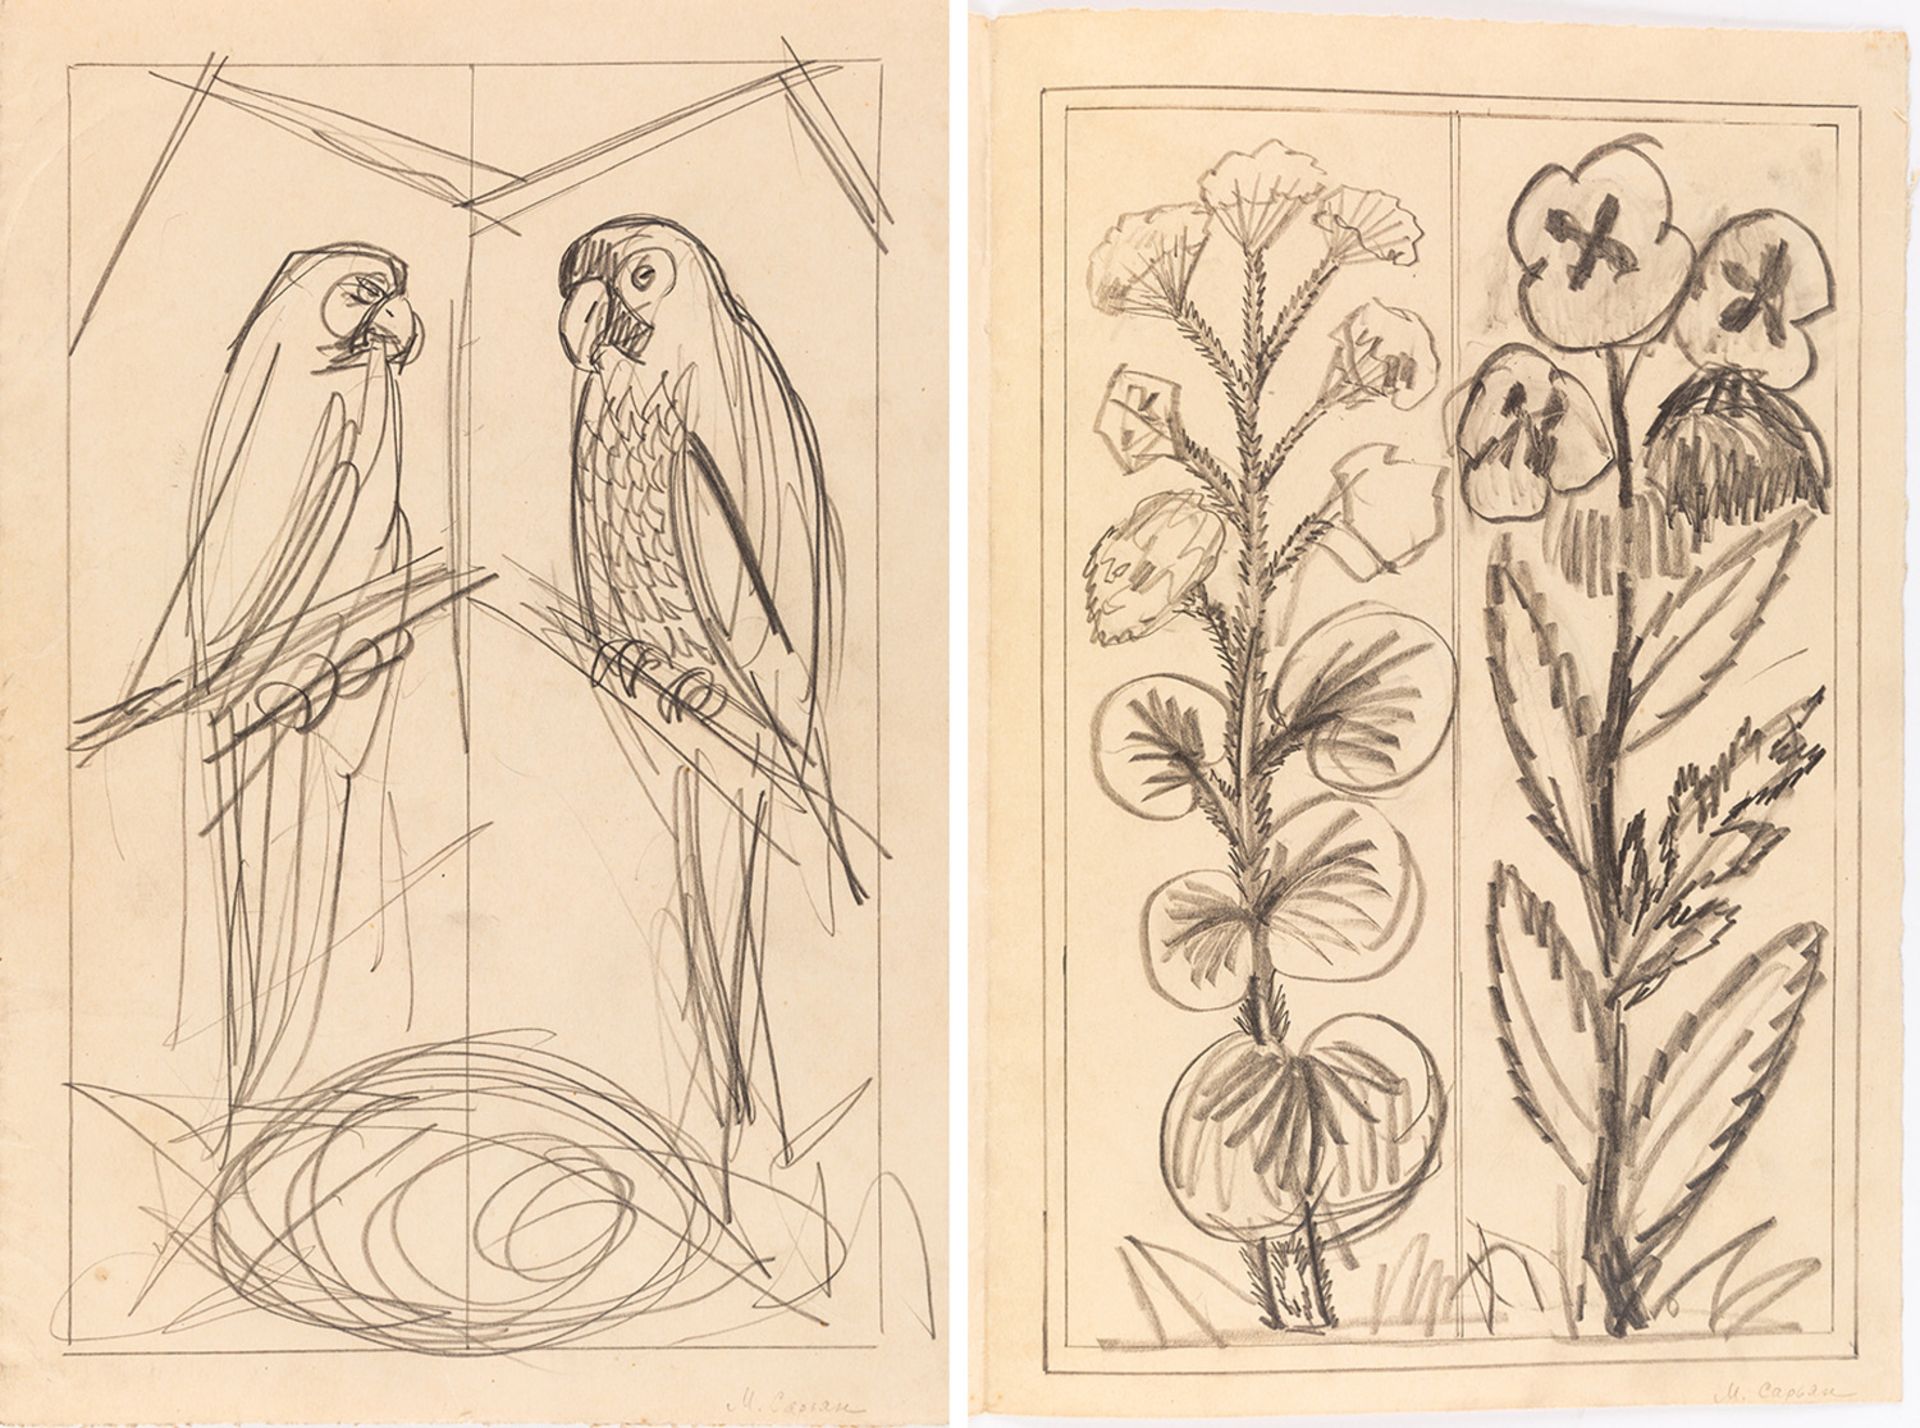 A PAIR OF SKETCHES BY MARTIROS SARYAN (ARMENIAN 1880-1972) FOR URAL THEATRE STAGE CURTAIN DESIGN